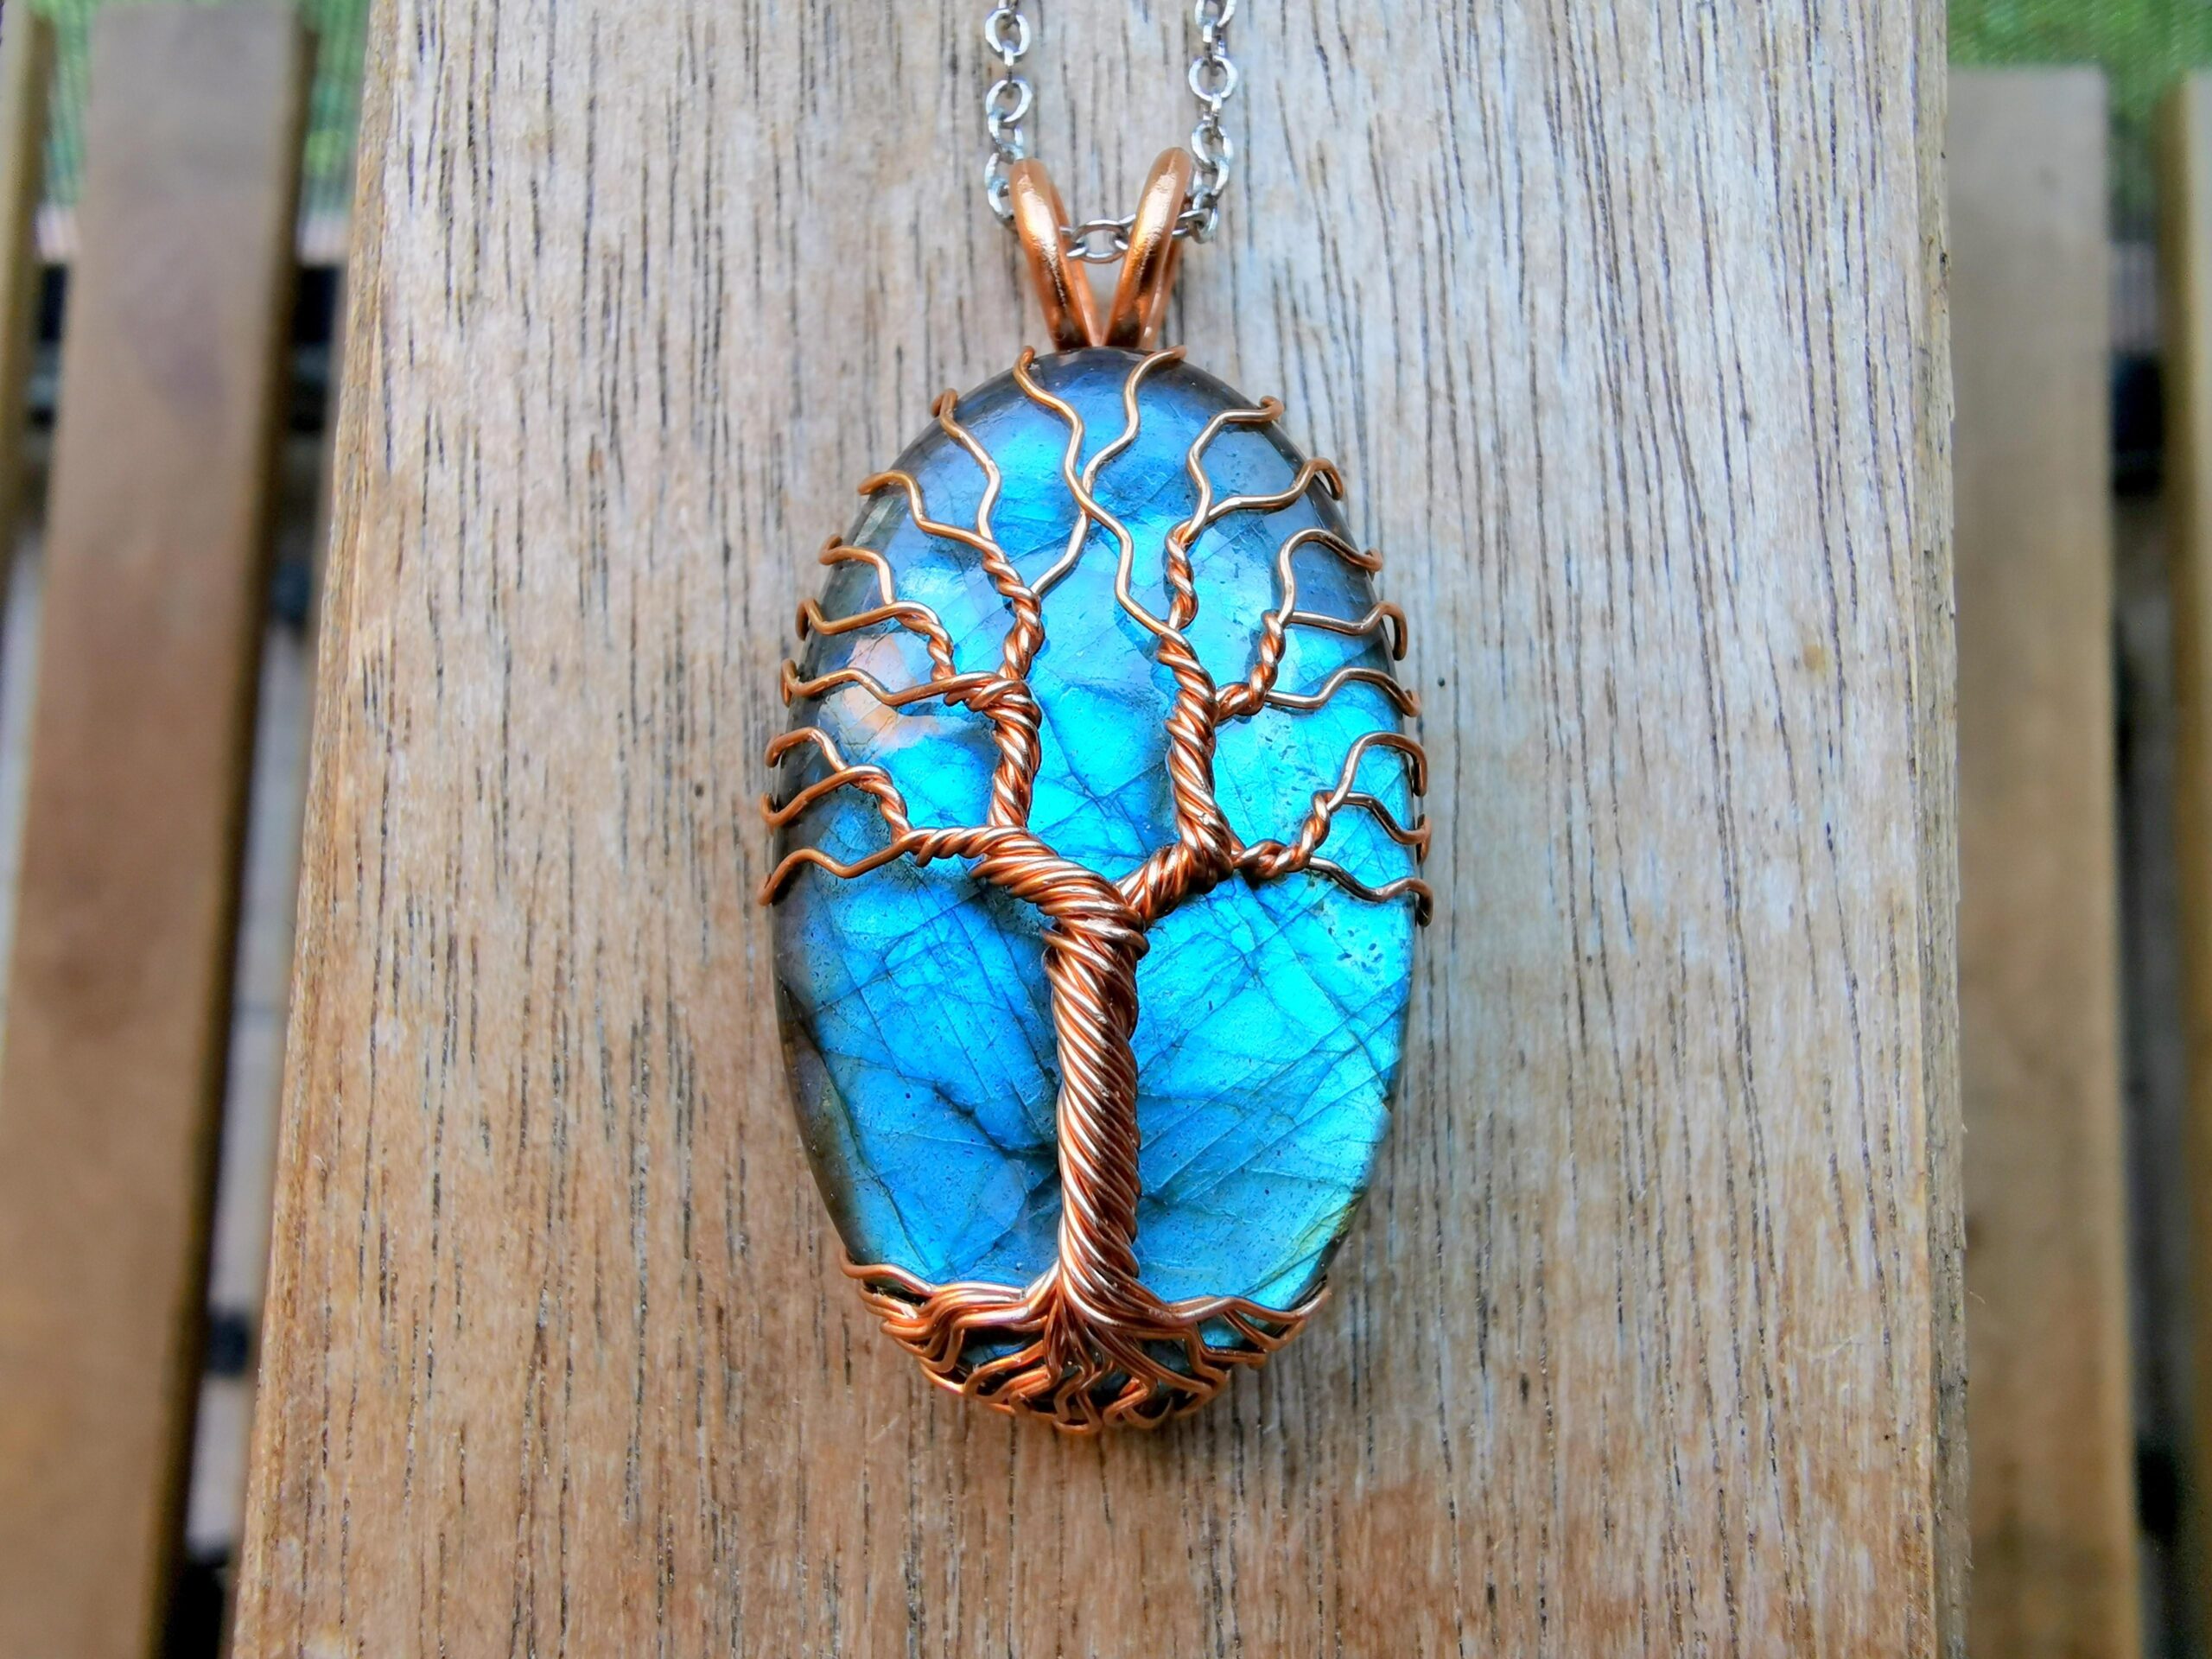 I frail about fours meters of copper wire for this labradorite tree pendant.